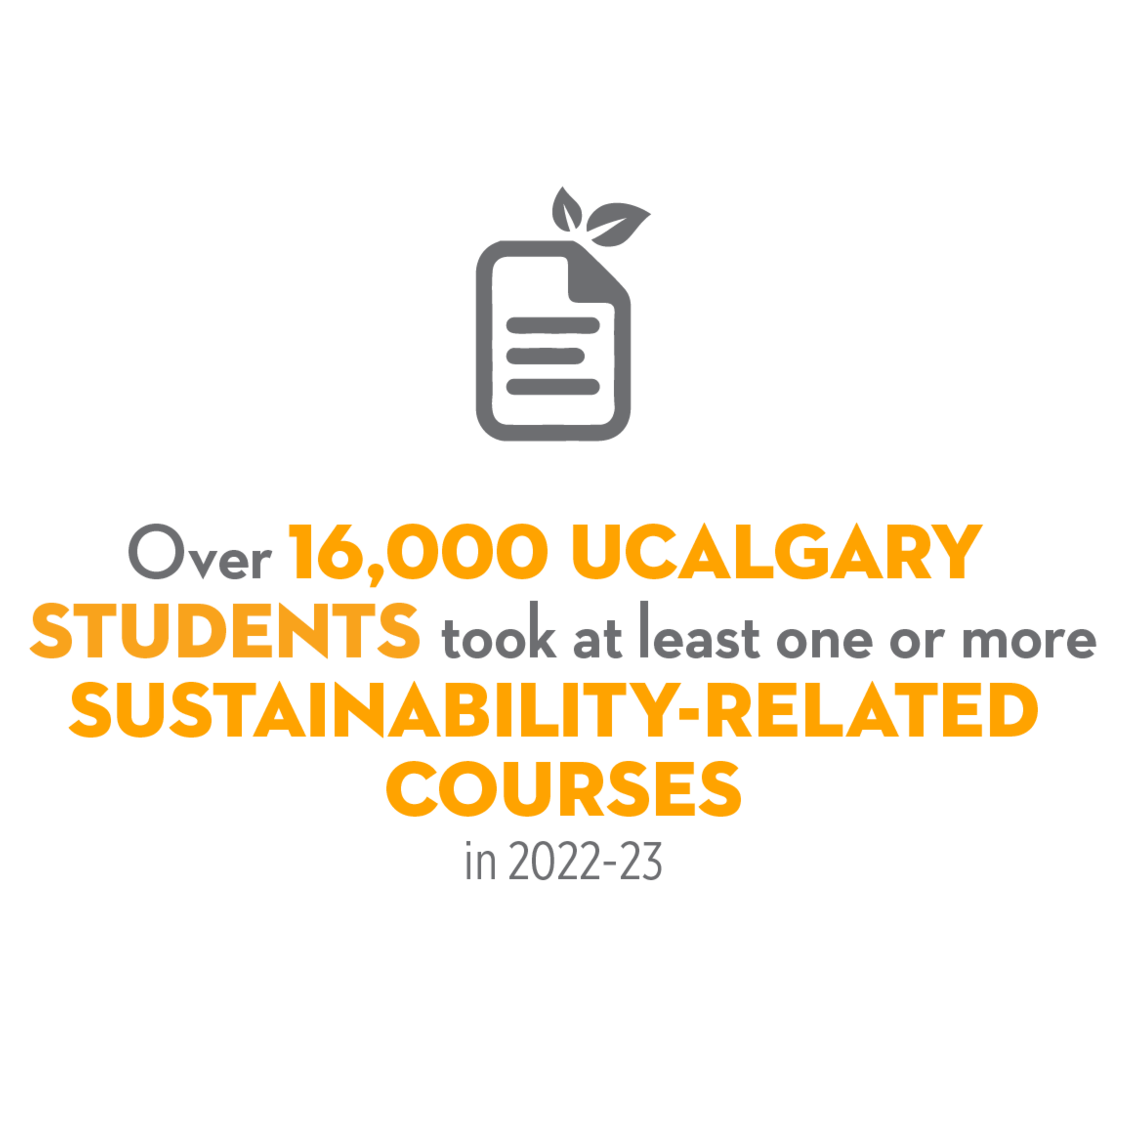 Over 16,000 UCalgary students took at least one or more sustainability-related course